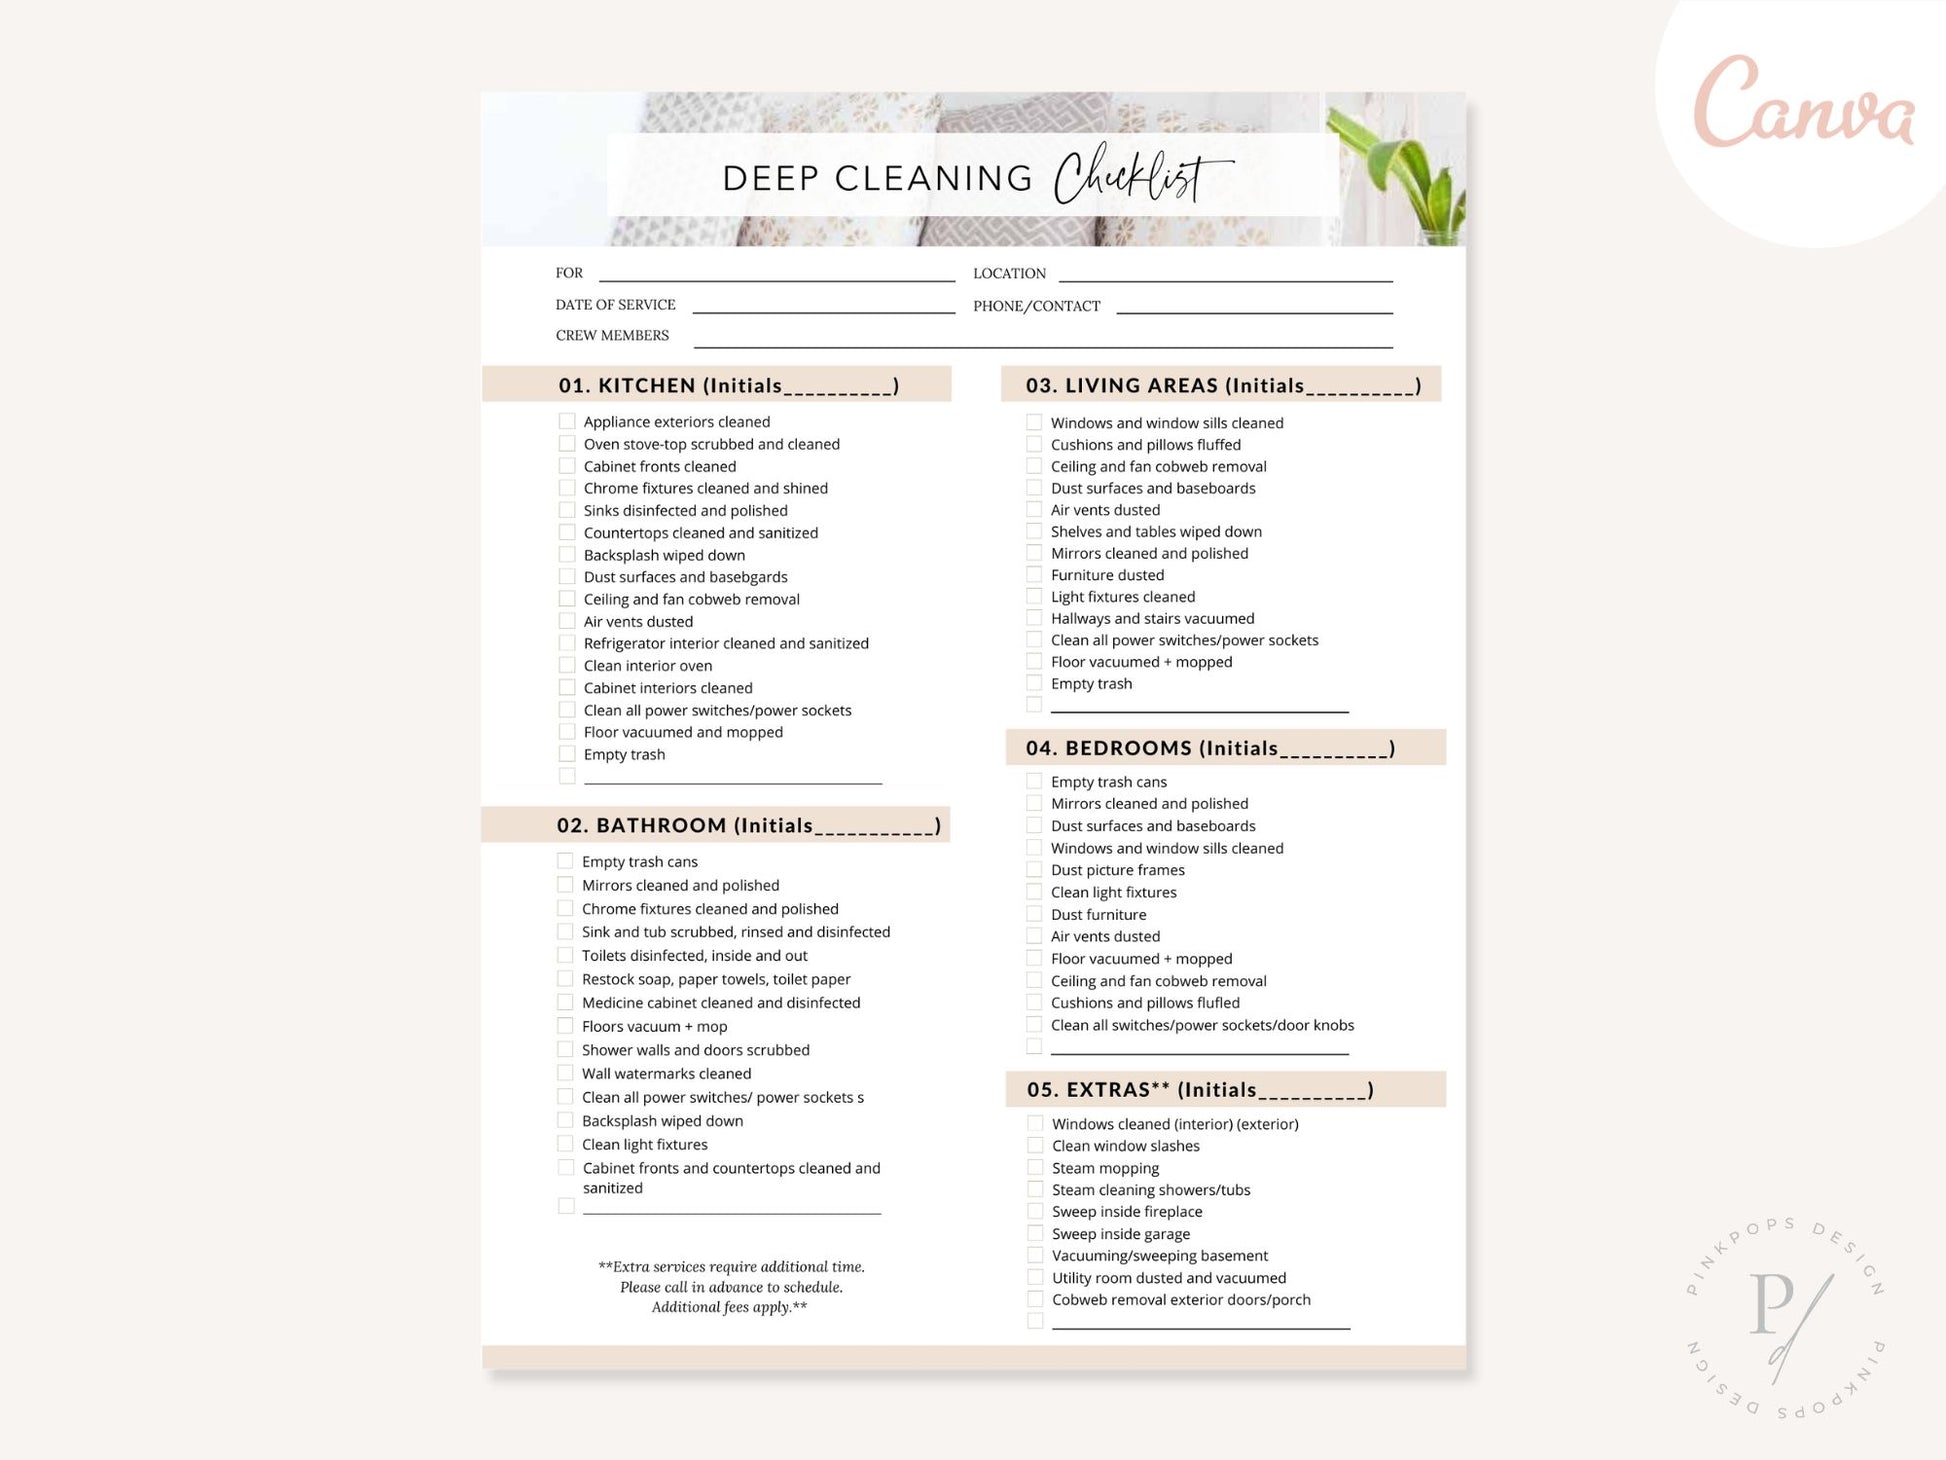 Deep Cleaning Checklist - Editable template for ensuring a meticulous and organized approach to deep cleaning tasks, refreshing and maintaining a pristine environment.